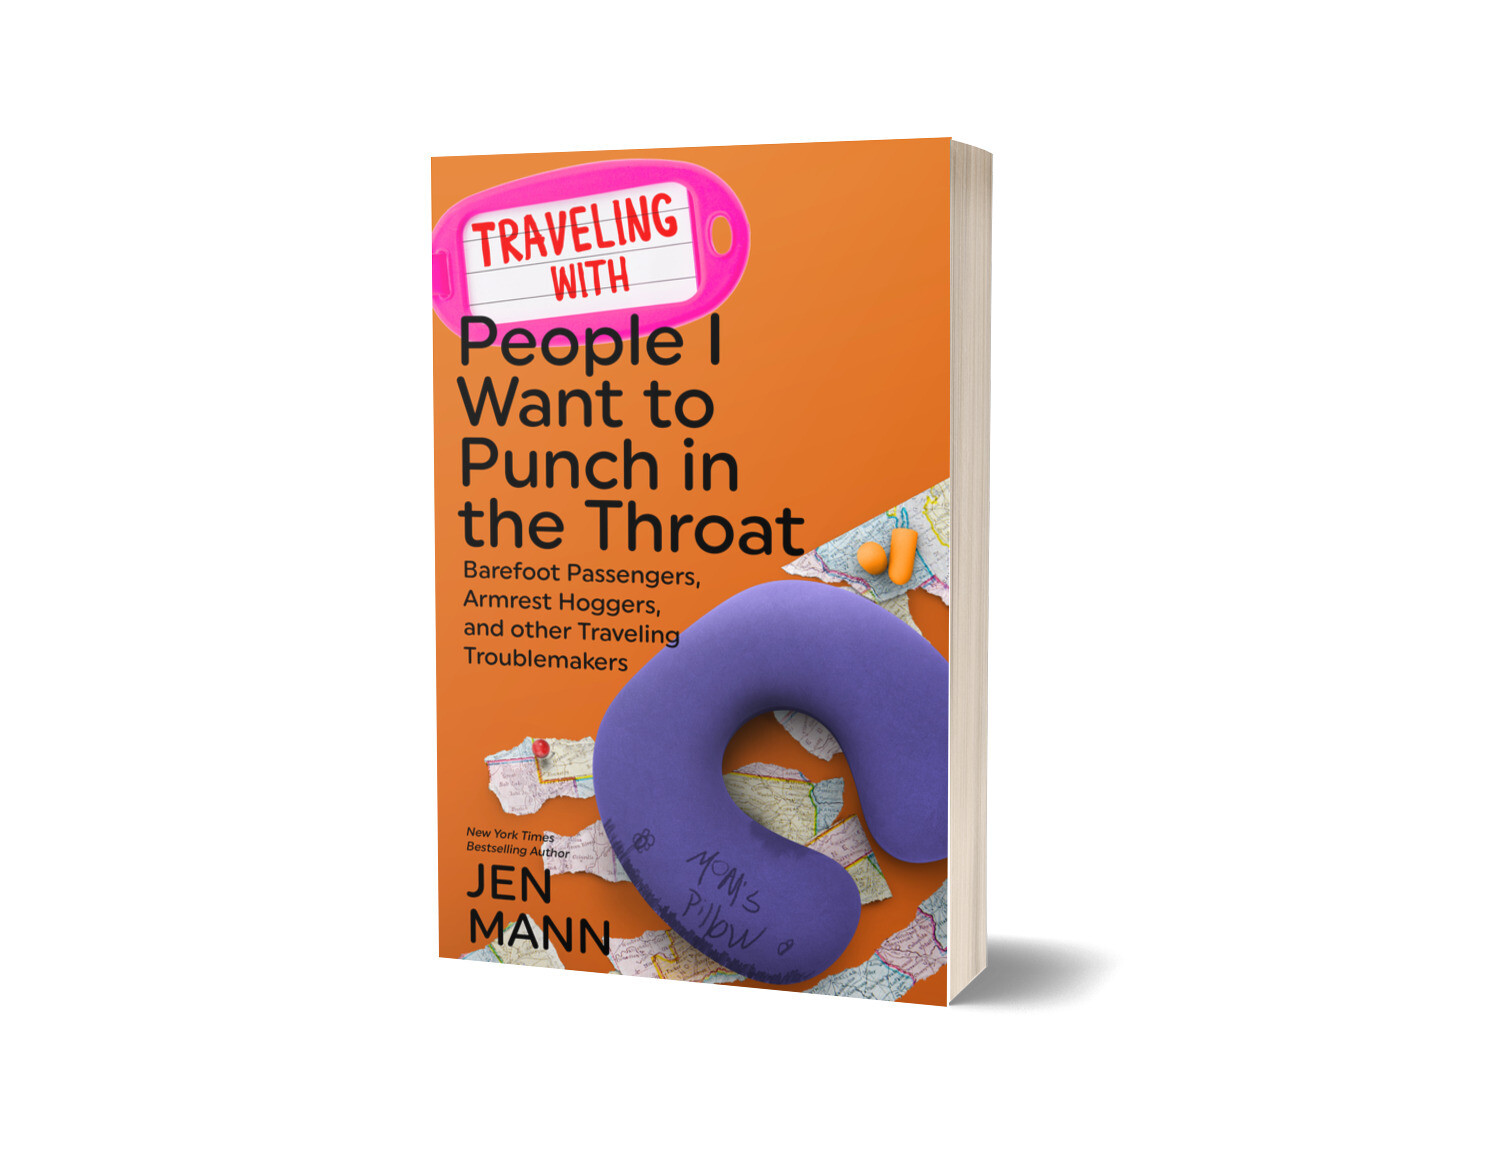 Traveling with People I Want to Punch in the Throat: Barefoot Passengers, Armrest Hoggers, and Other Traveling Troublemakers - Signed Copy